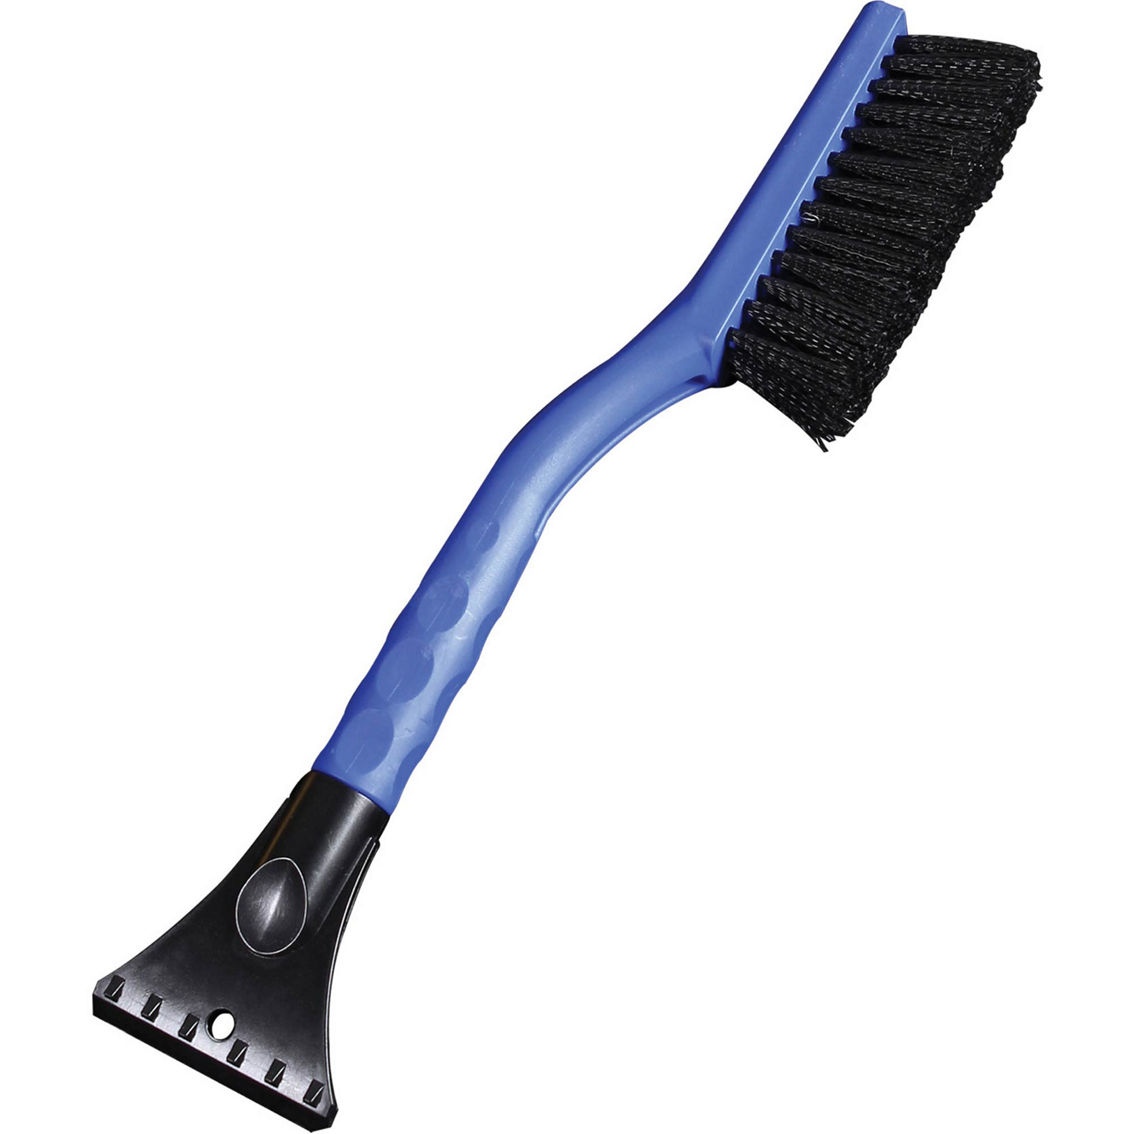 Mallory Snow Weevil Snow Removal Brush - Image 2 of 4